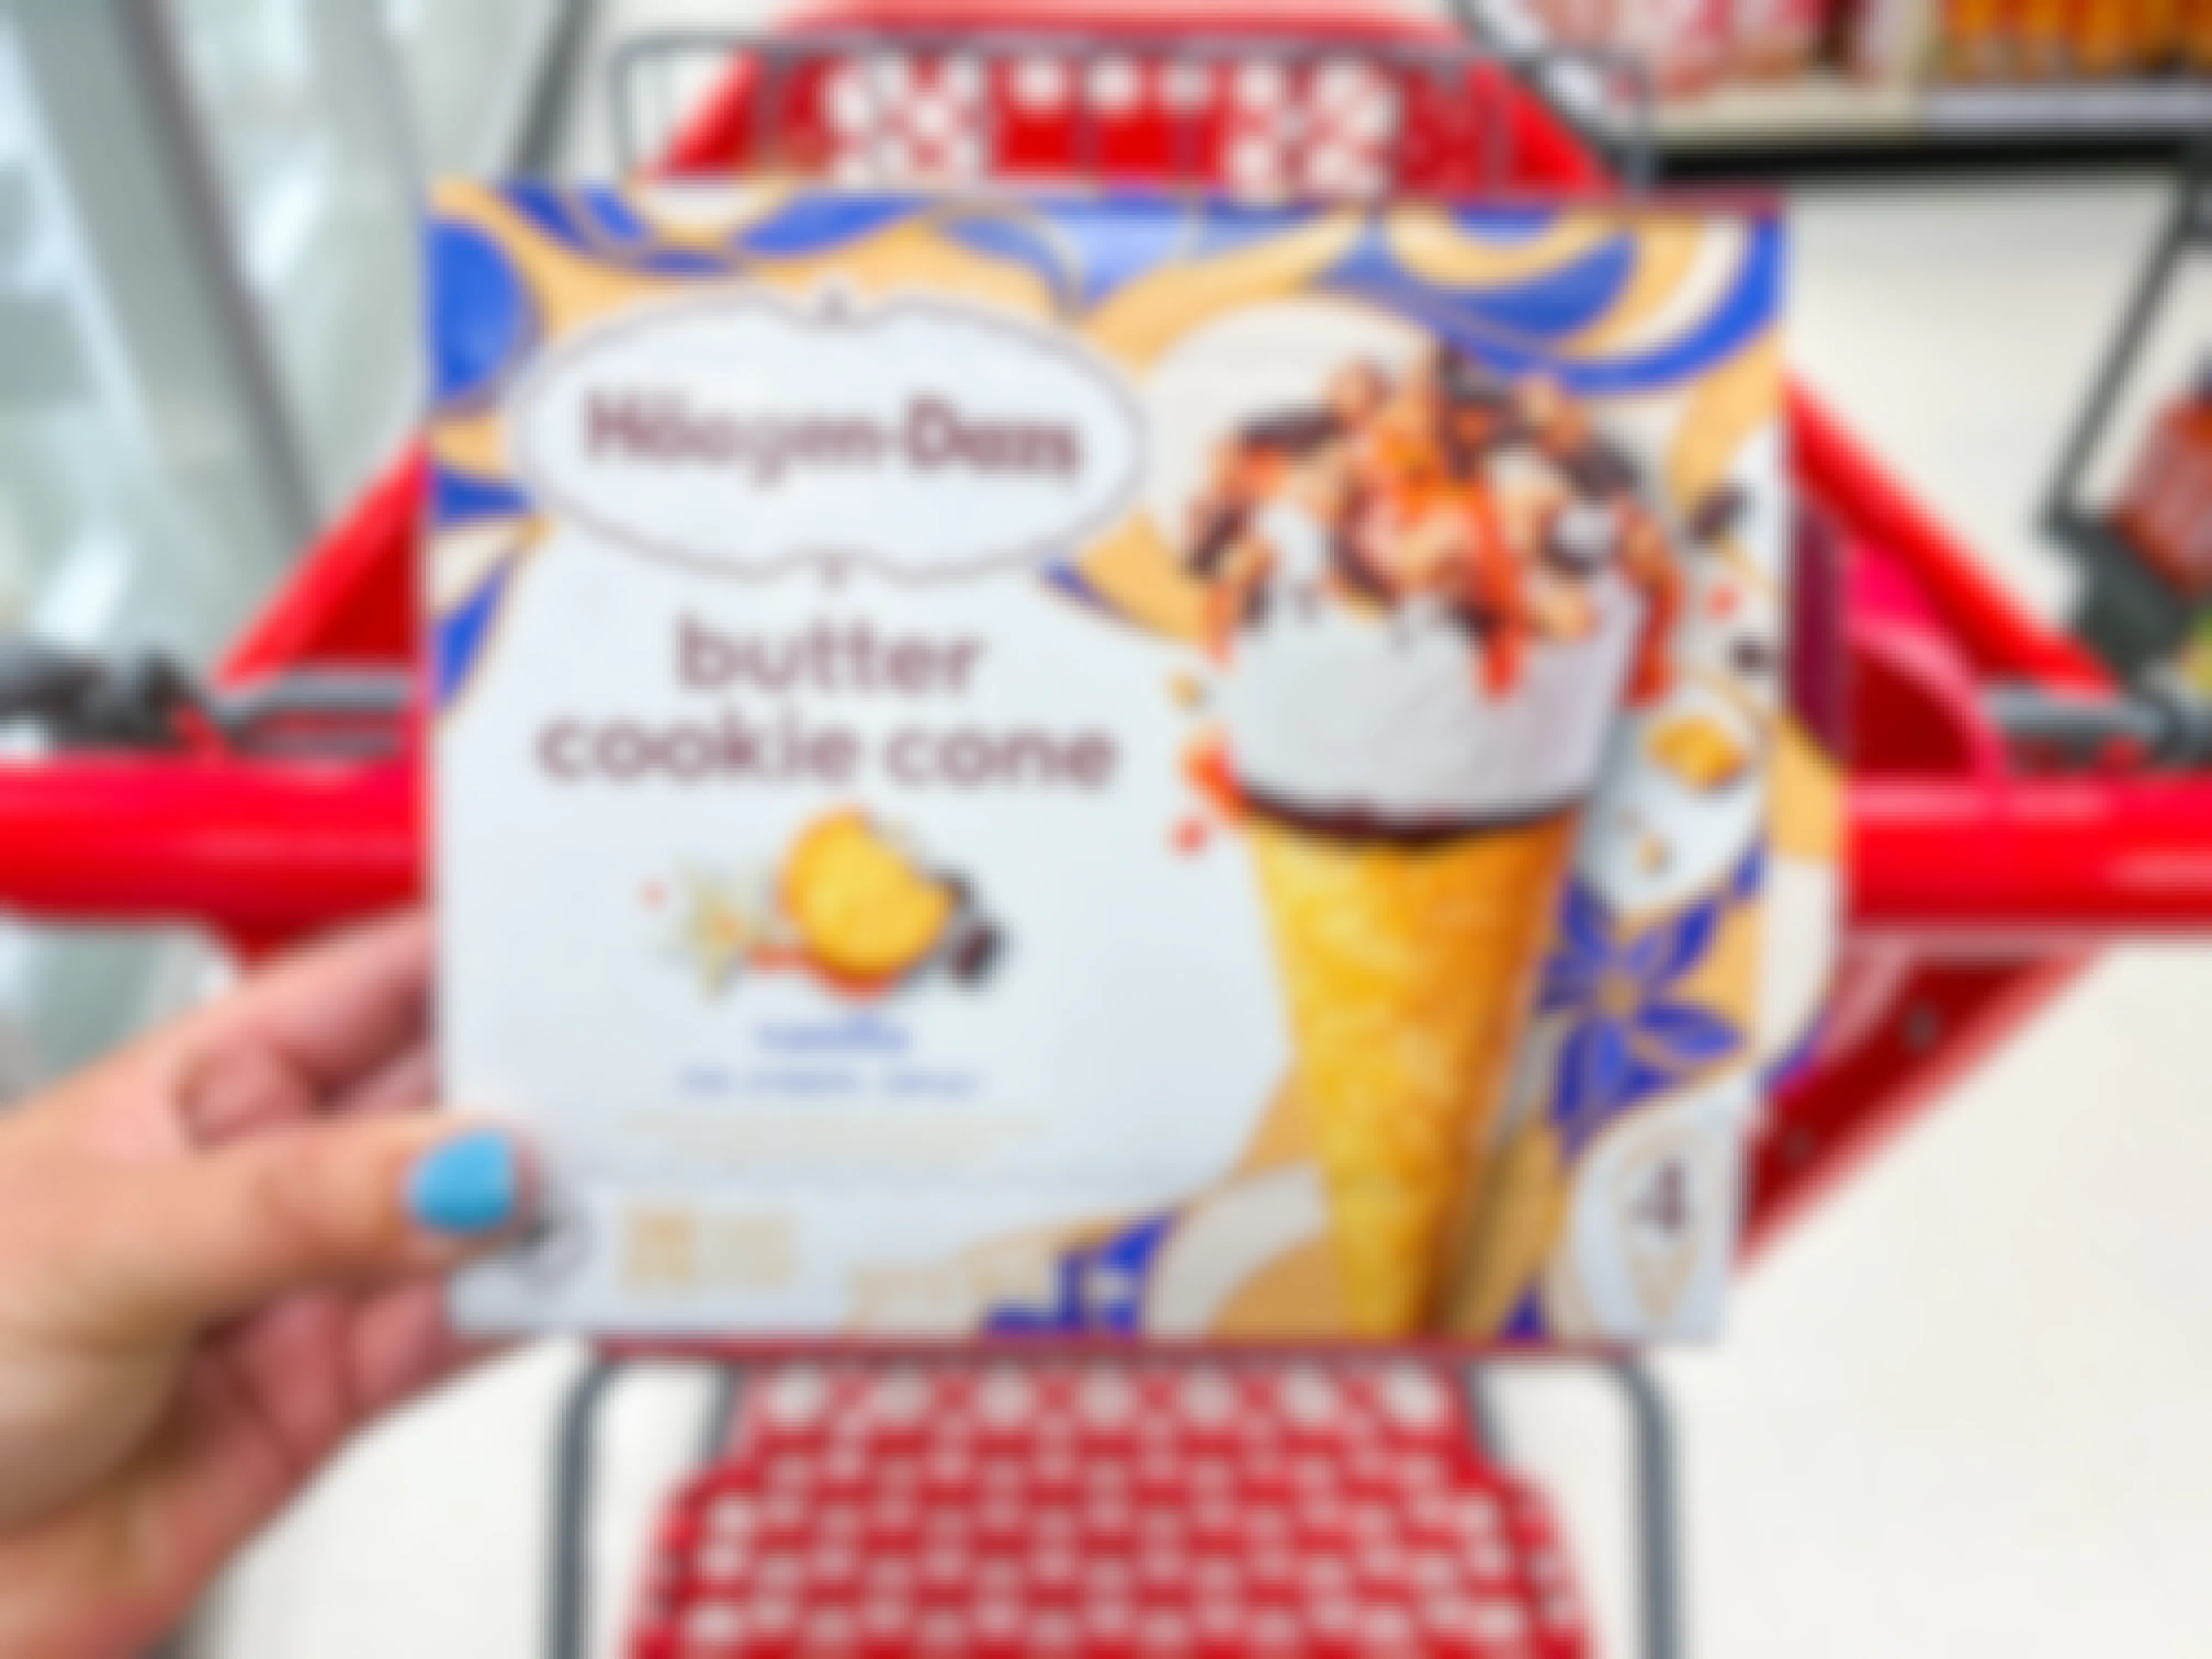 Häagen-Dazs Butter Cookie Cones — The Ice Cream You Need This Summer